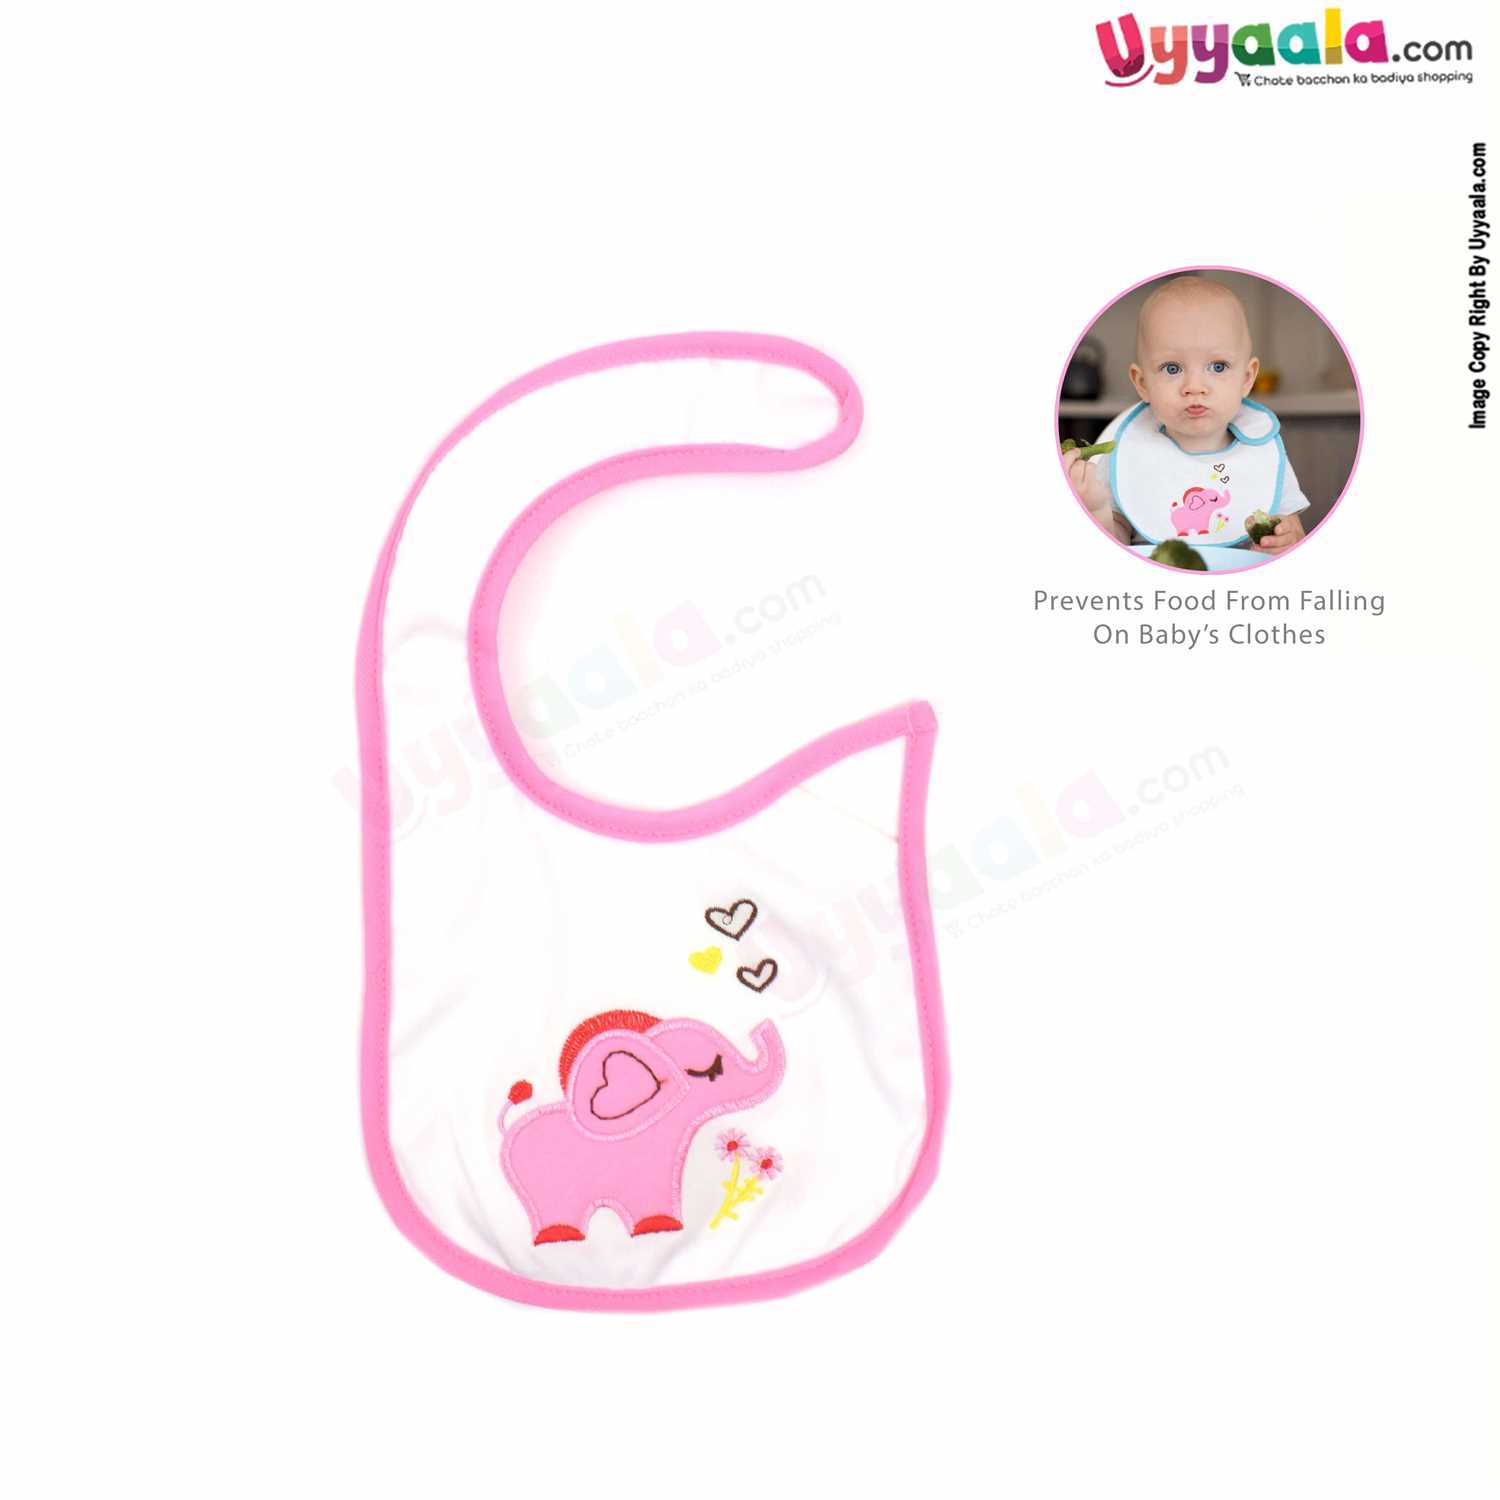 Baby Bib One Side Soft Cotton Hosiery & Another Side Pvc with Elephant Print Size (24*19cm)- Pink & White